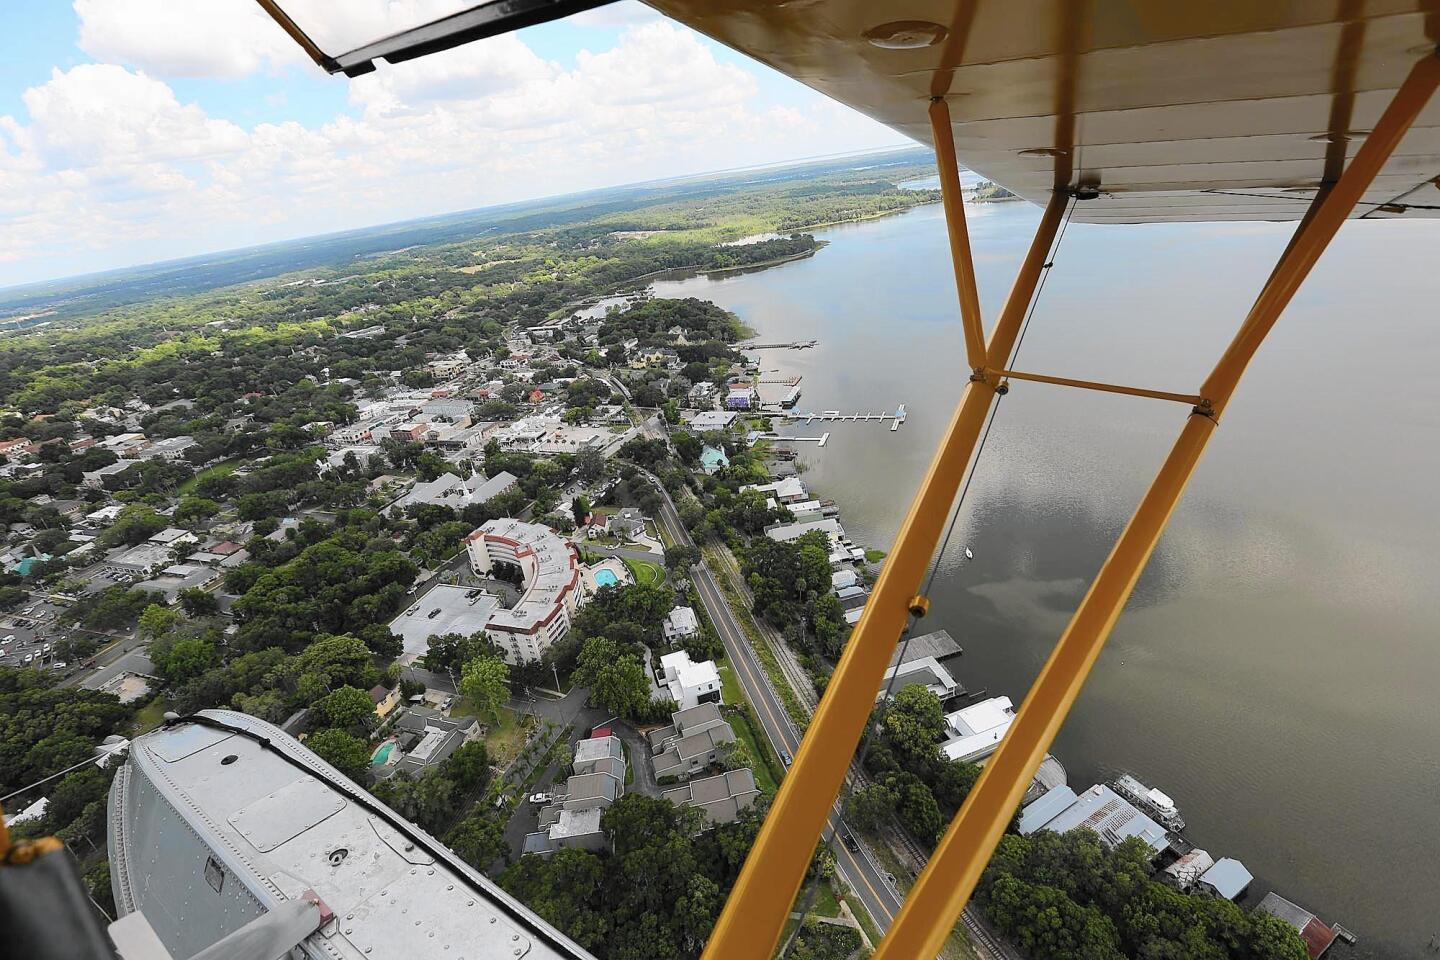 Downtown Mount Dora is viewed in this stunning view during a Jones Brothers Seaplane tour over Lake Dora in Lake County on Friday, June 3, 2016. (Stephen M. Dowell/Orlando Sentinel)